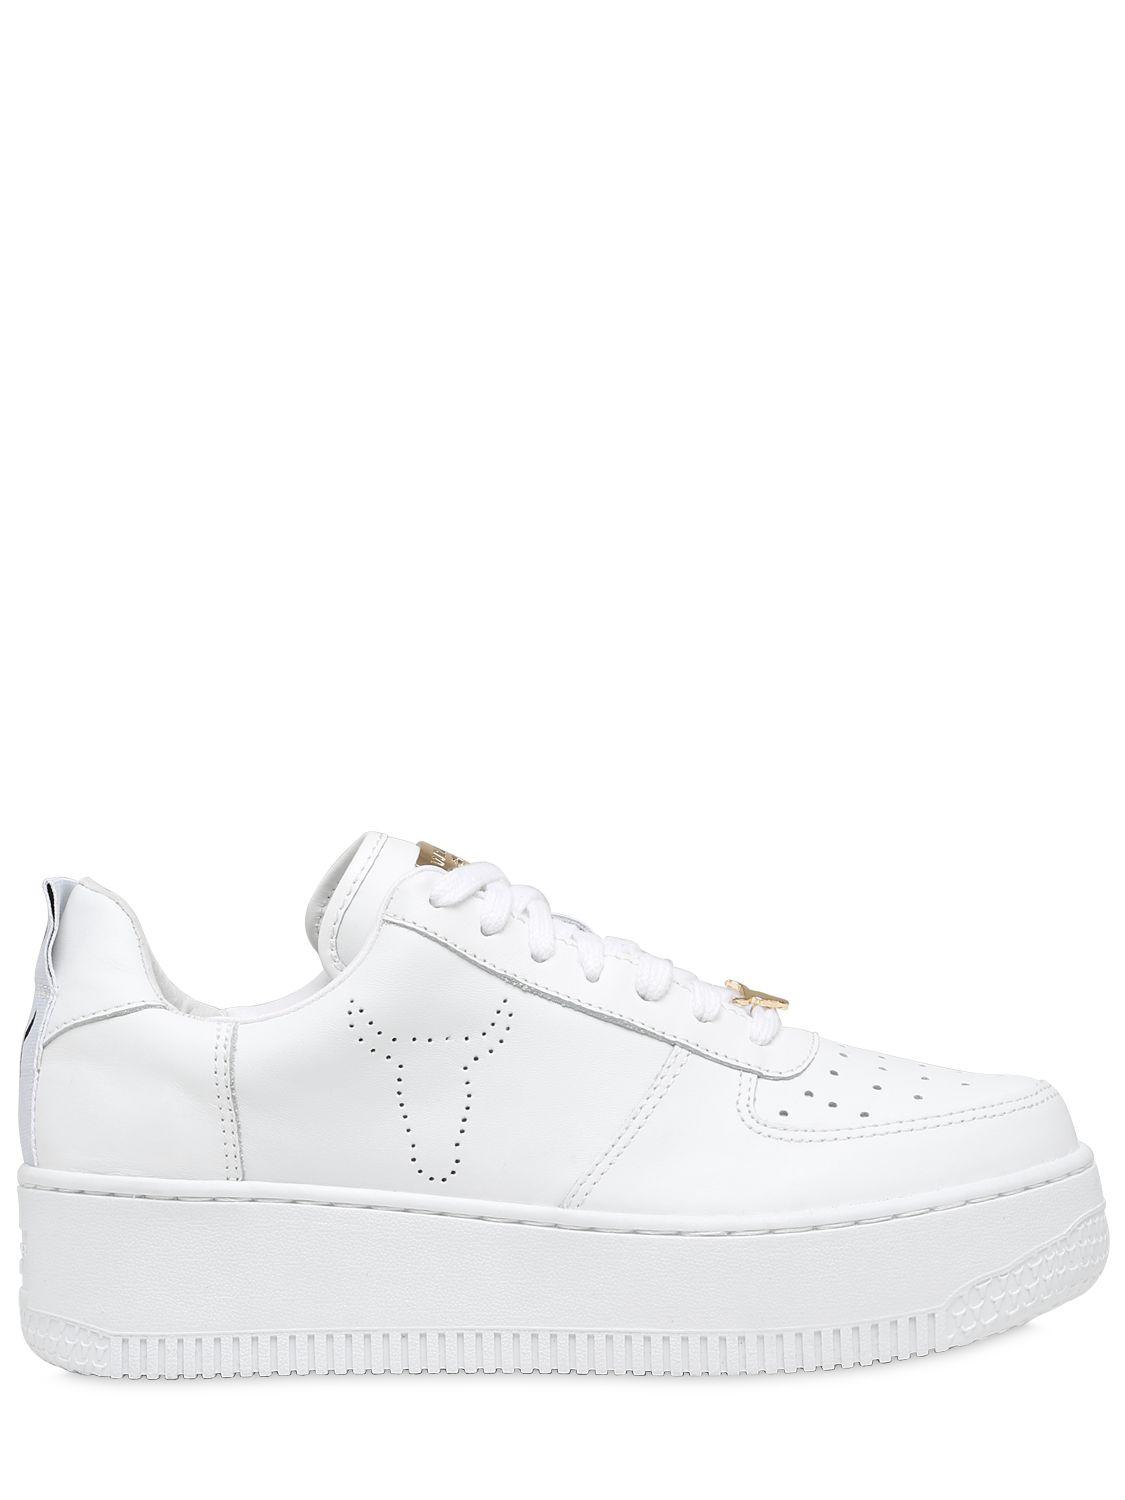 Windsor Smith 50mm Racer Leather Sneakers in White - Lyst